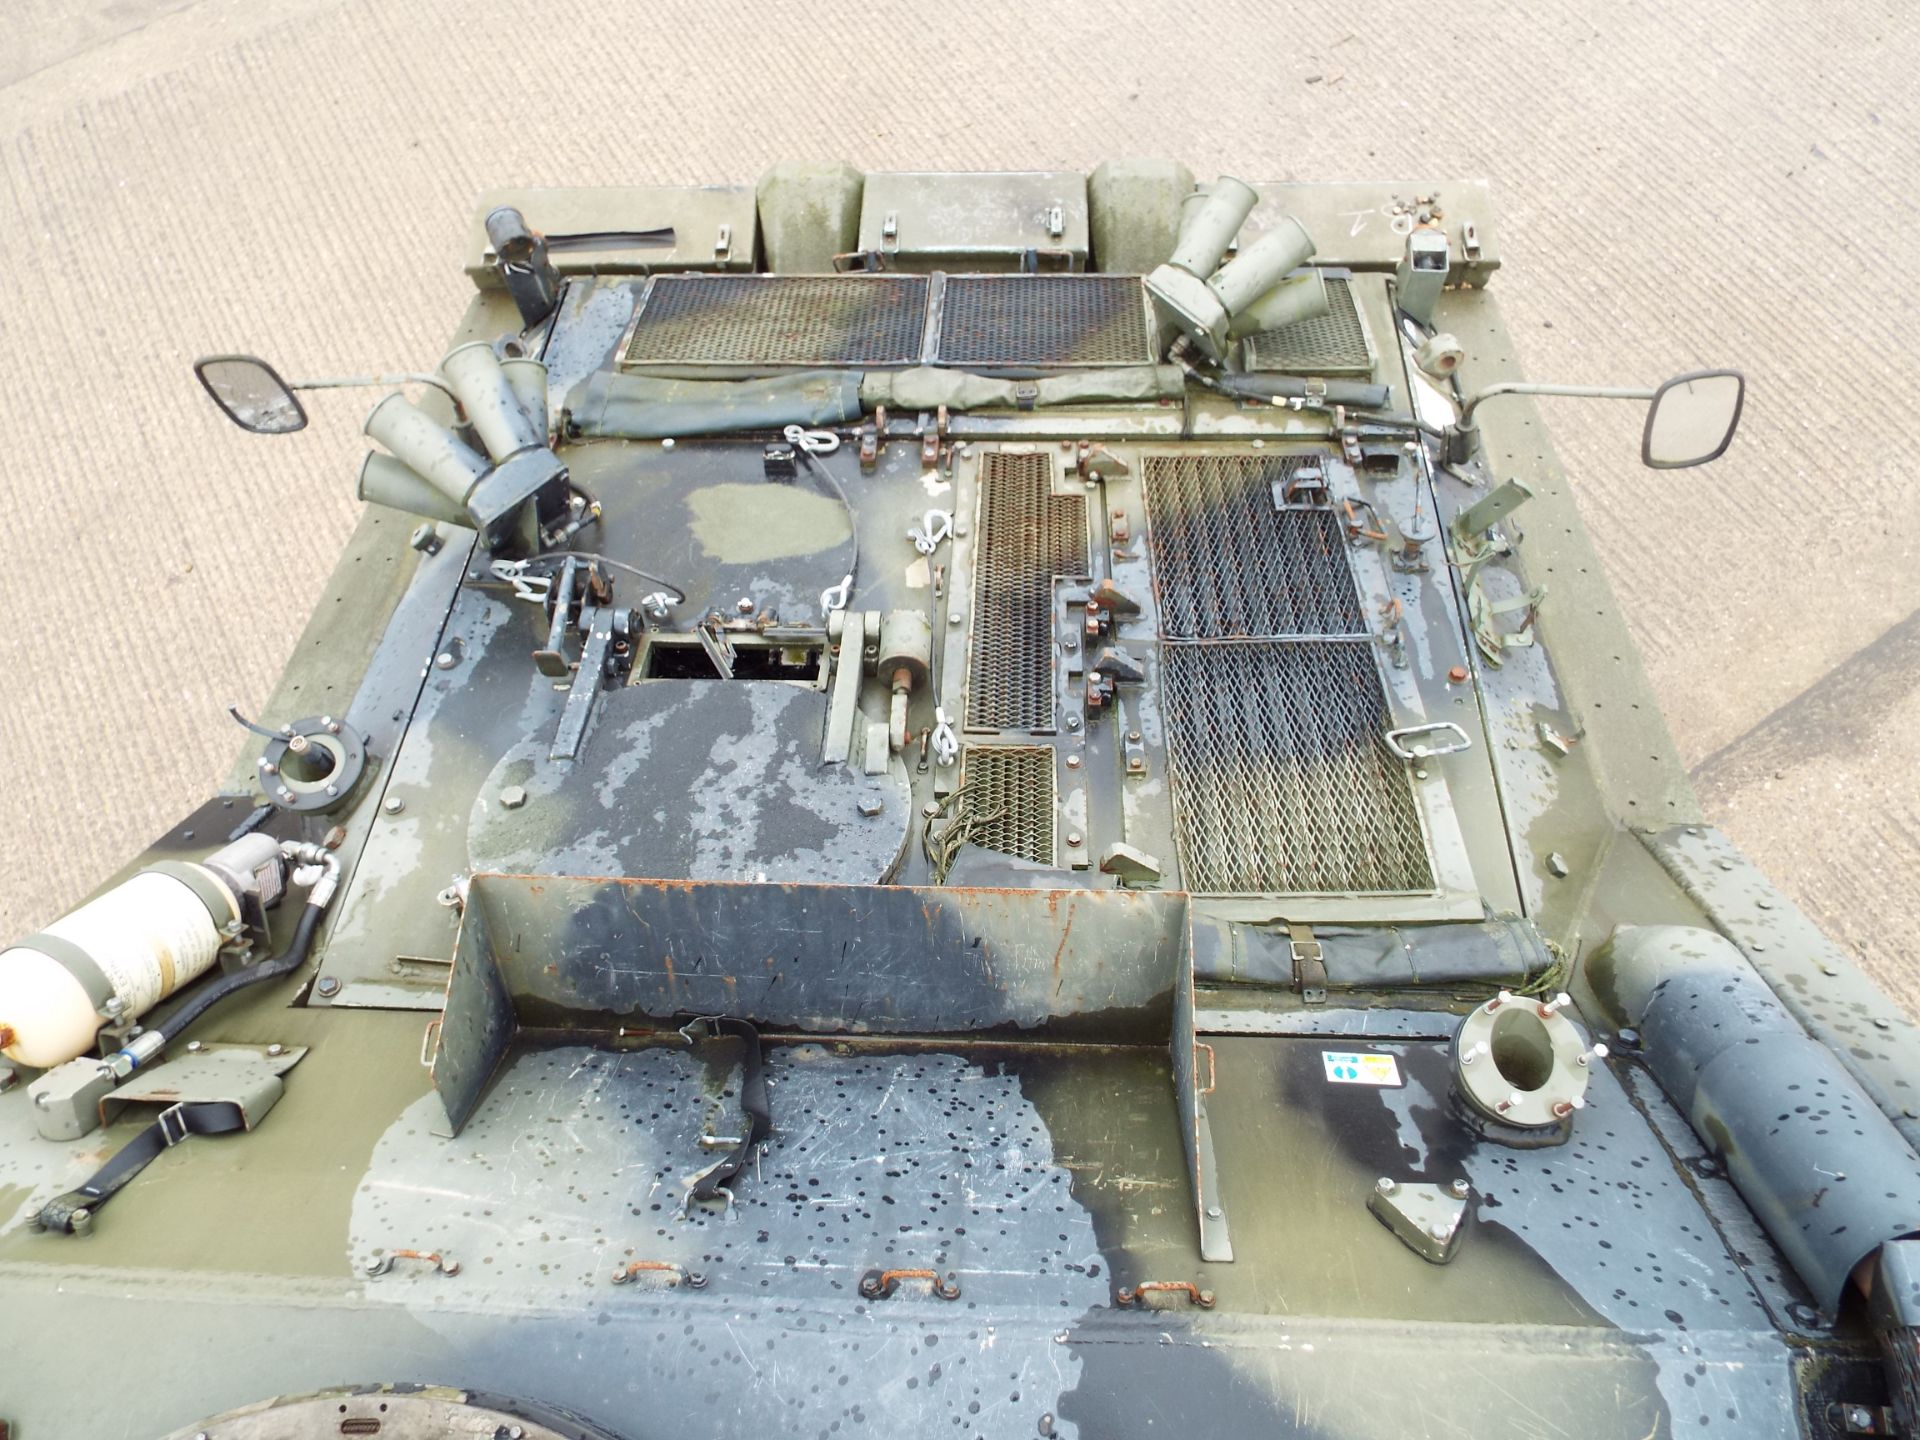 CVRT (Combat Vehicle Reconnaissance Tracked) FV105 Sultan Armoured Personnel Carrier - Image 9 of 31